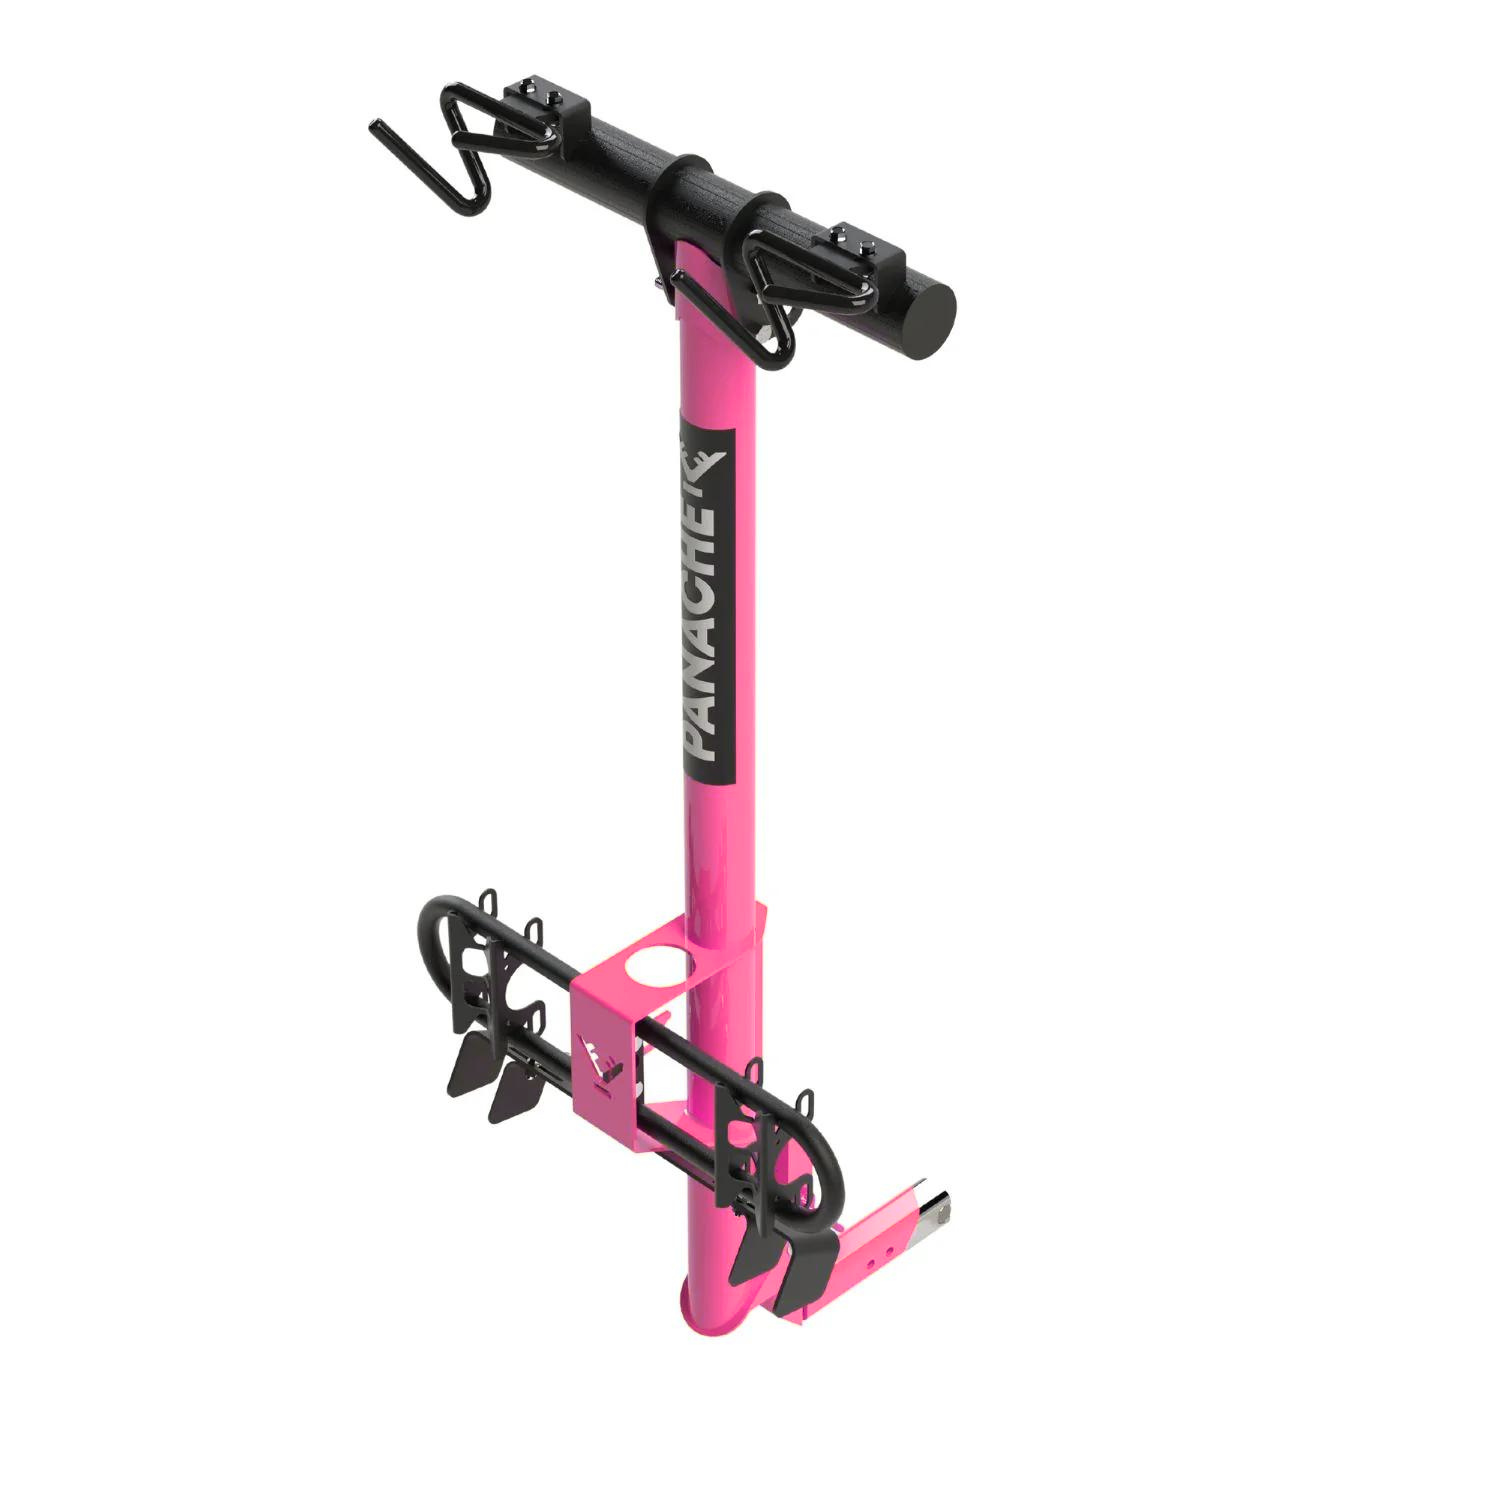 T2 vertical bike rack for 2 inch and 1.25 inch hitch